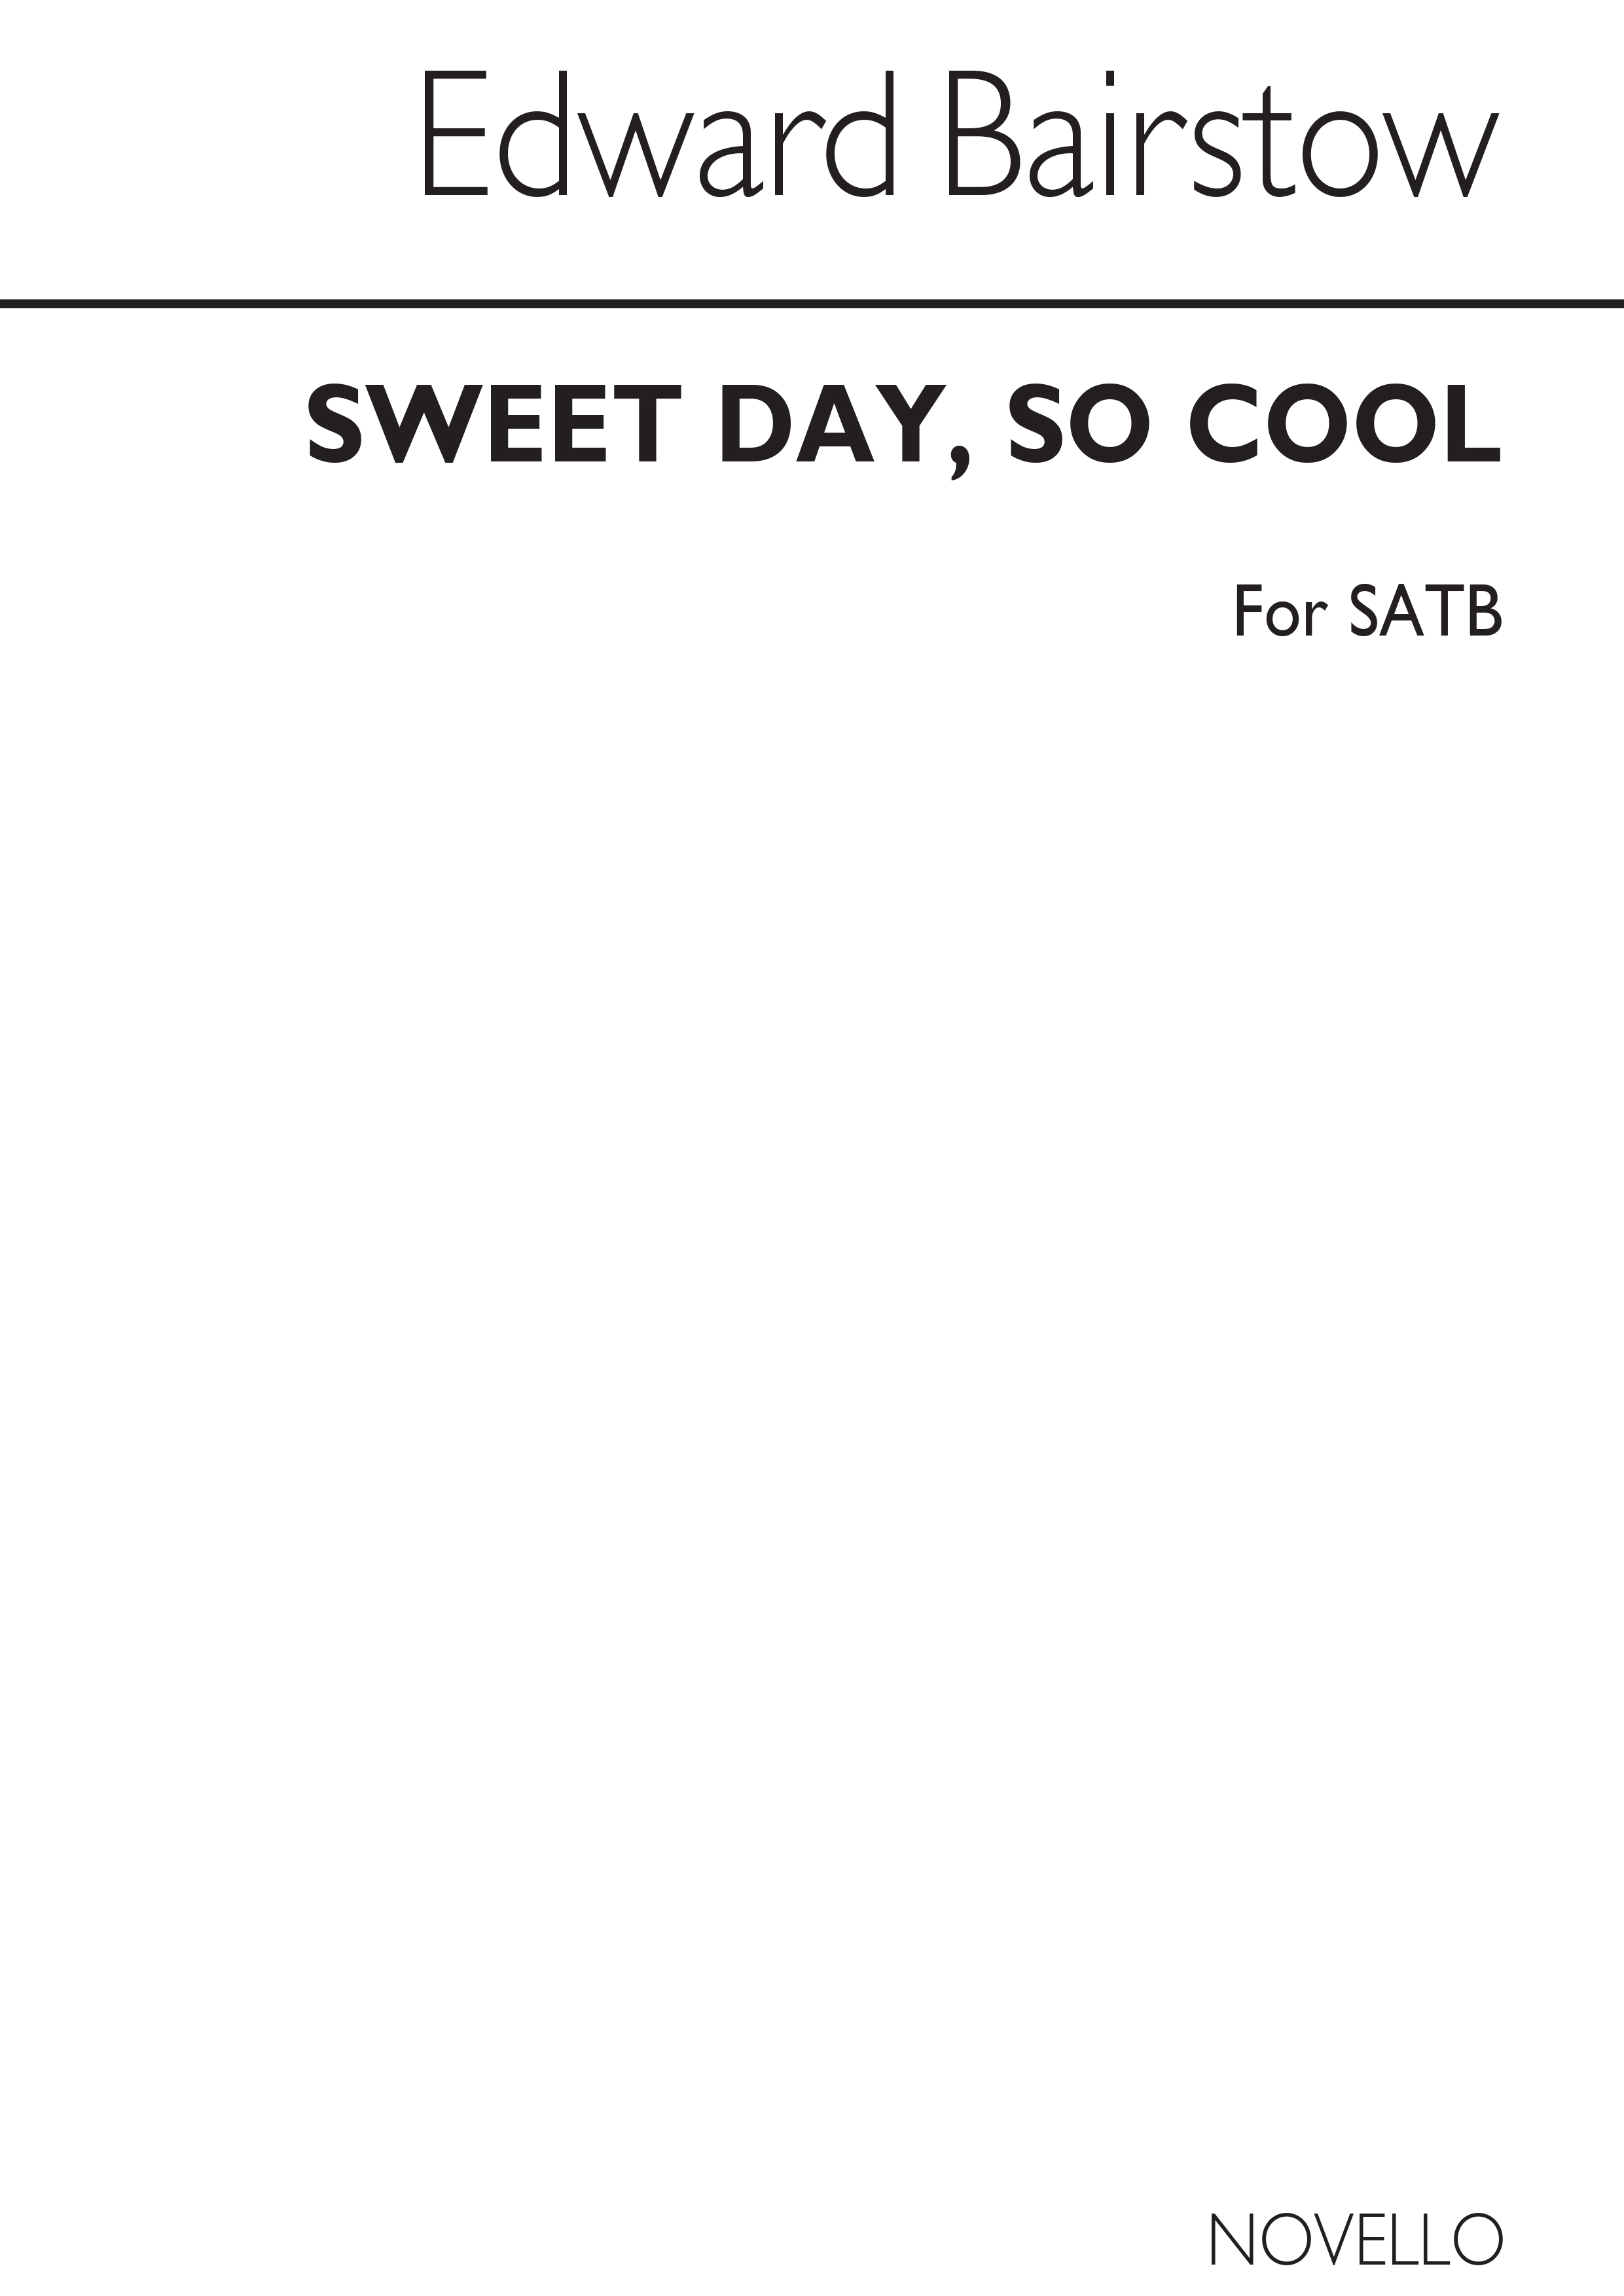 Bairstow: Sweet Day So Cool for SATB Chorus